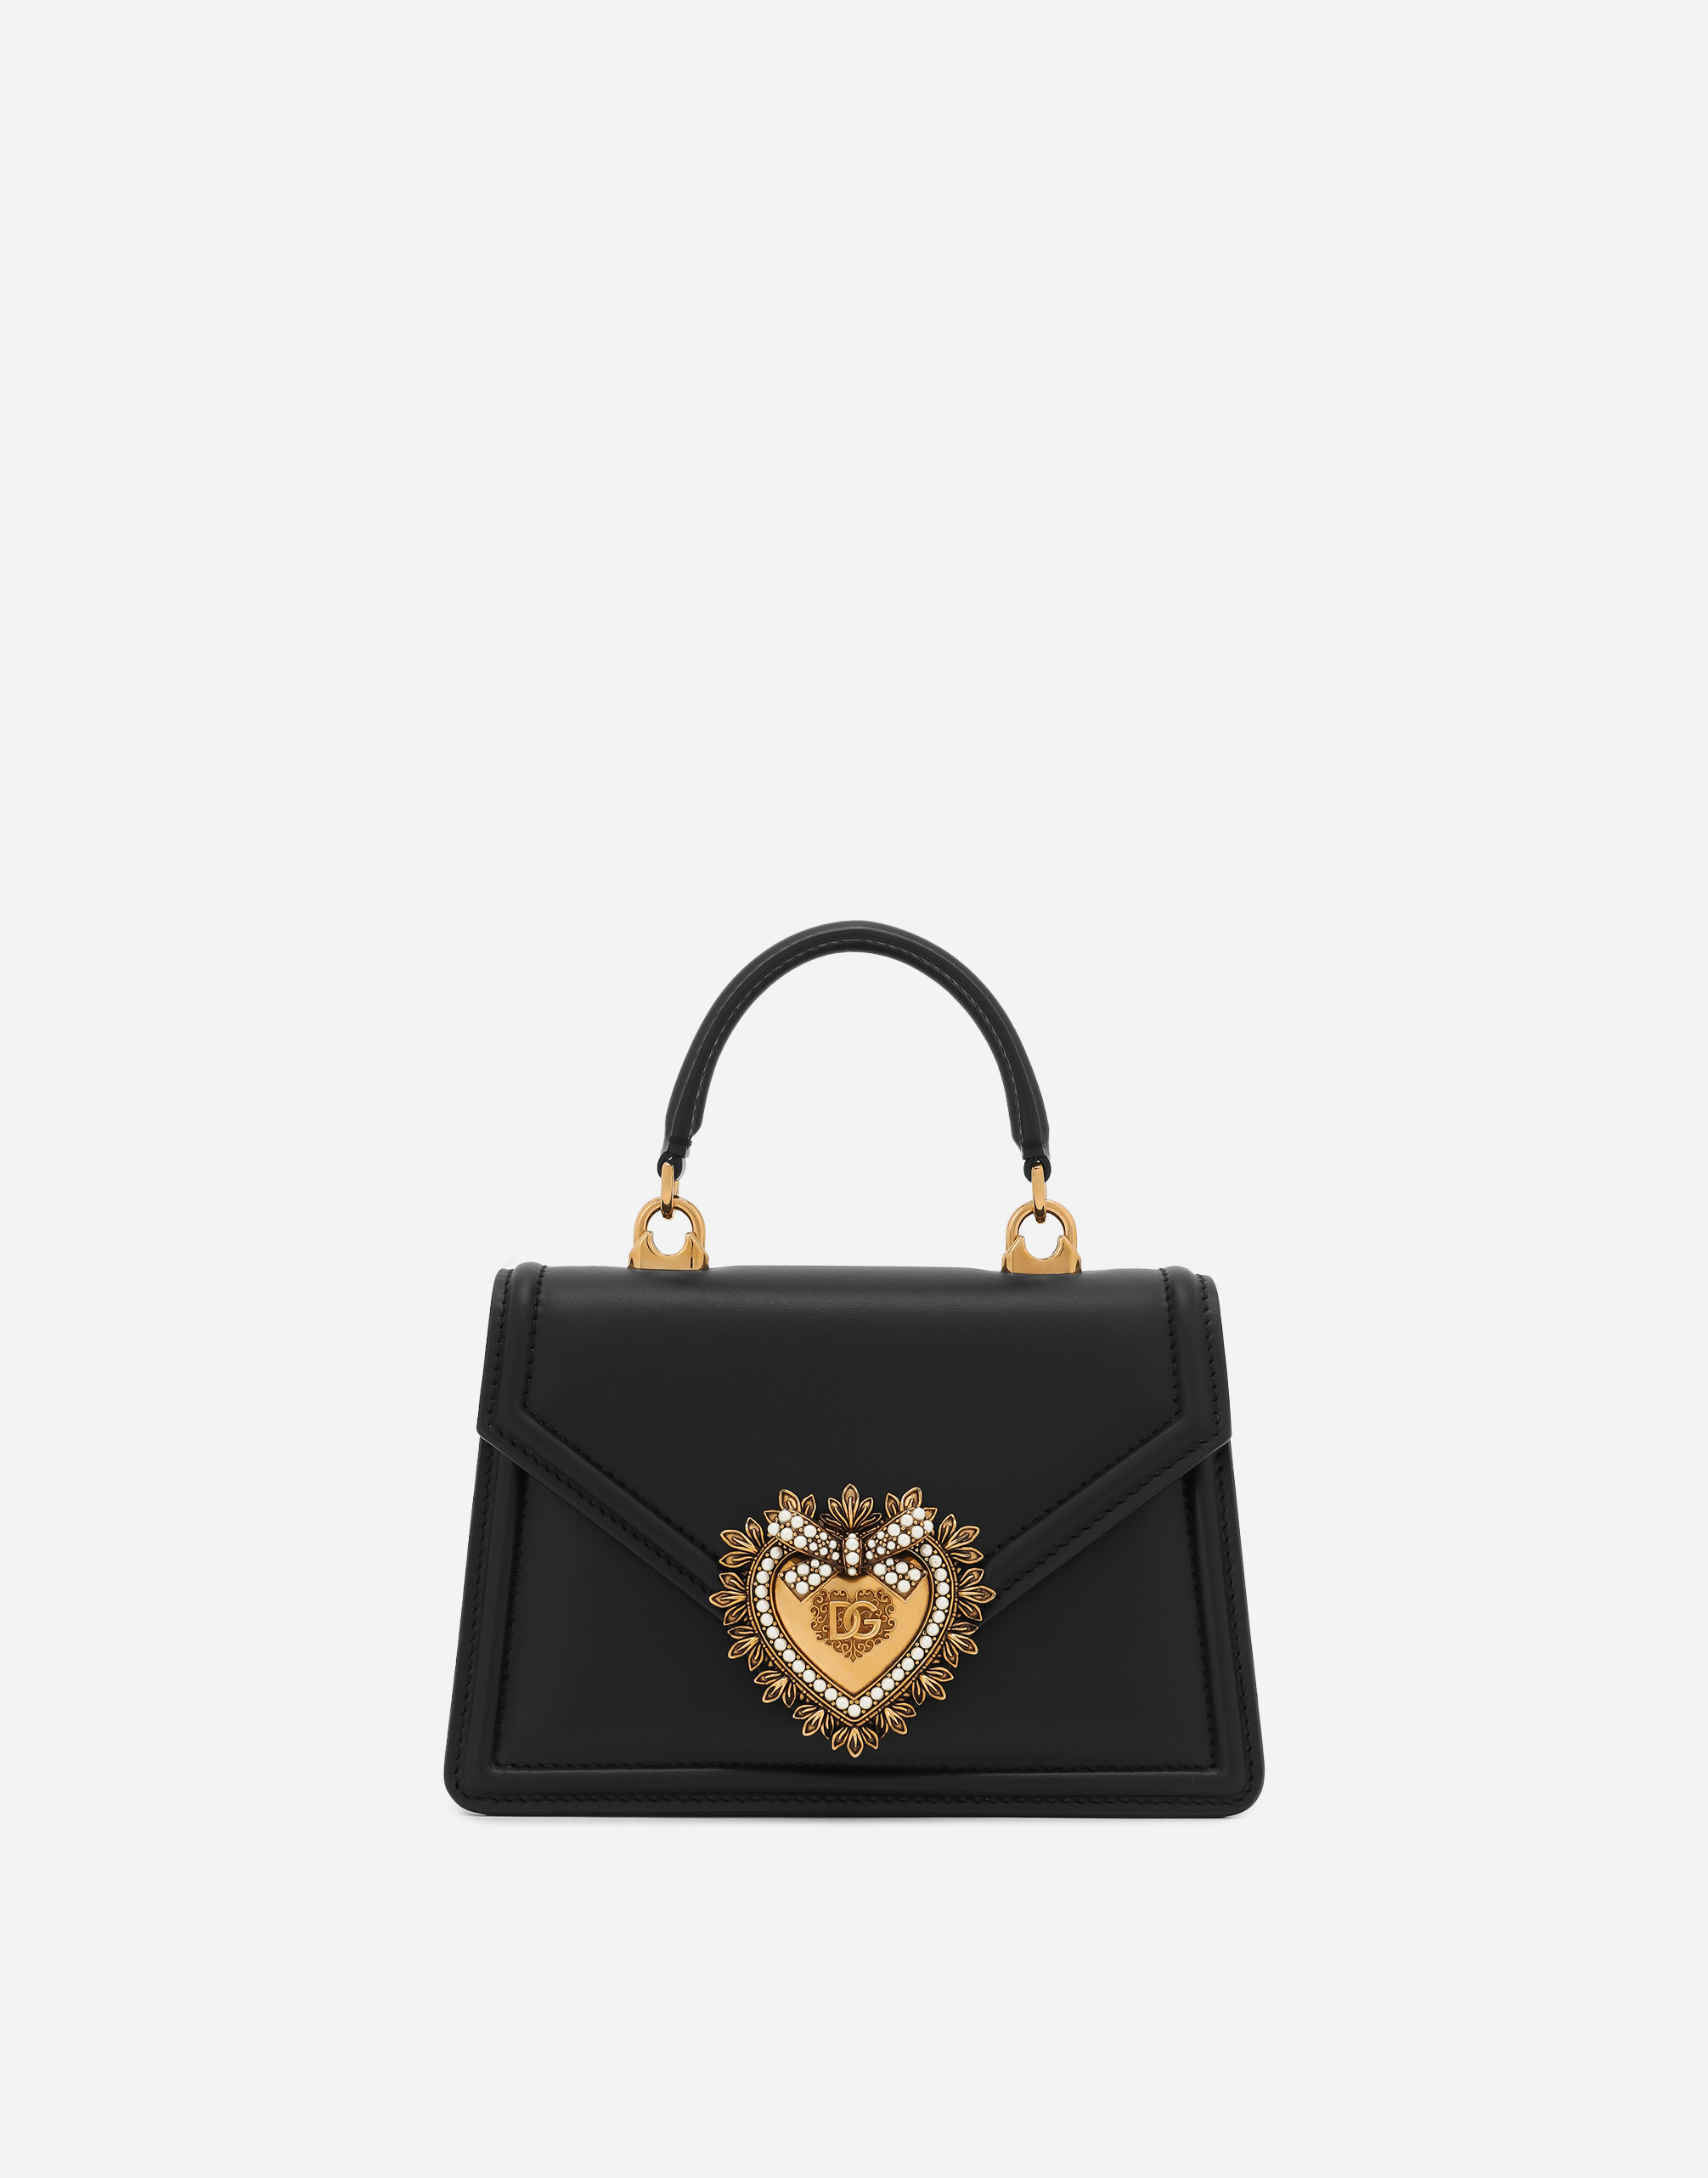 Small Devotion top-handle bag in Black